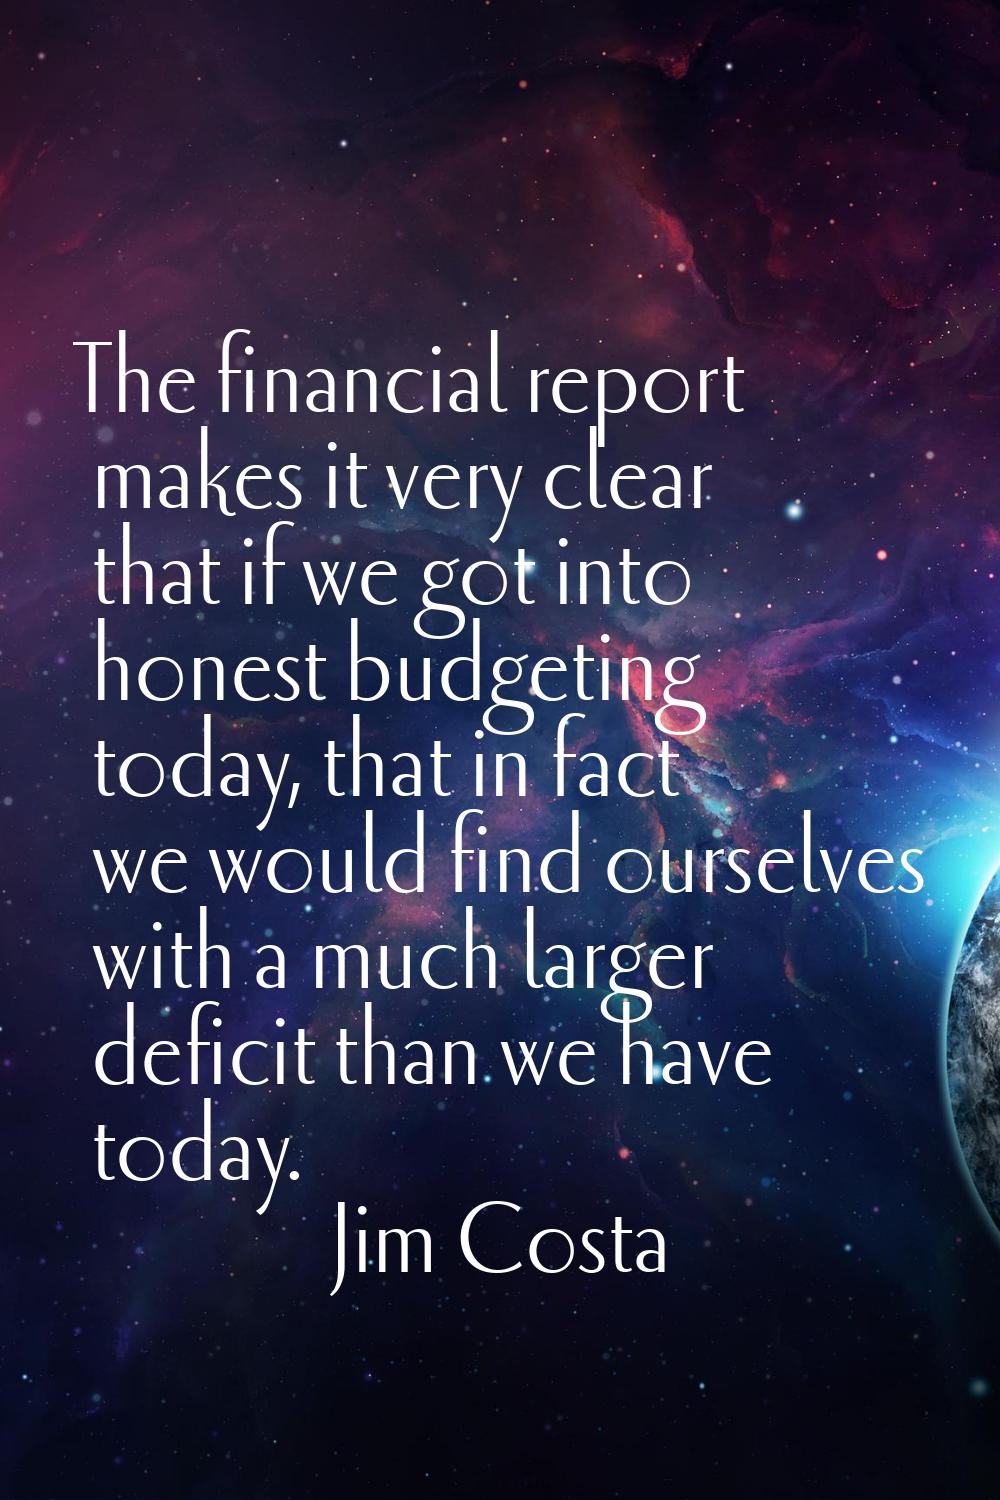 The financial report makes it very clear that if we got into honest budgeting today, that in fact w